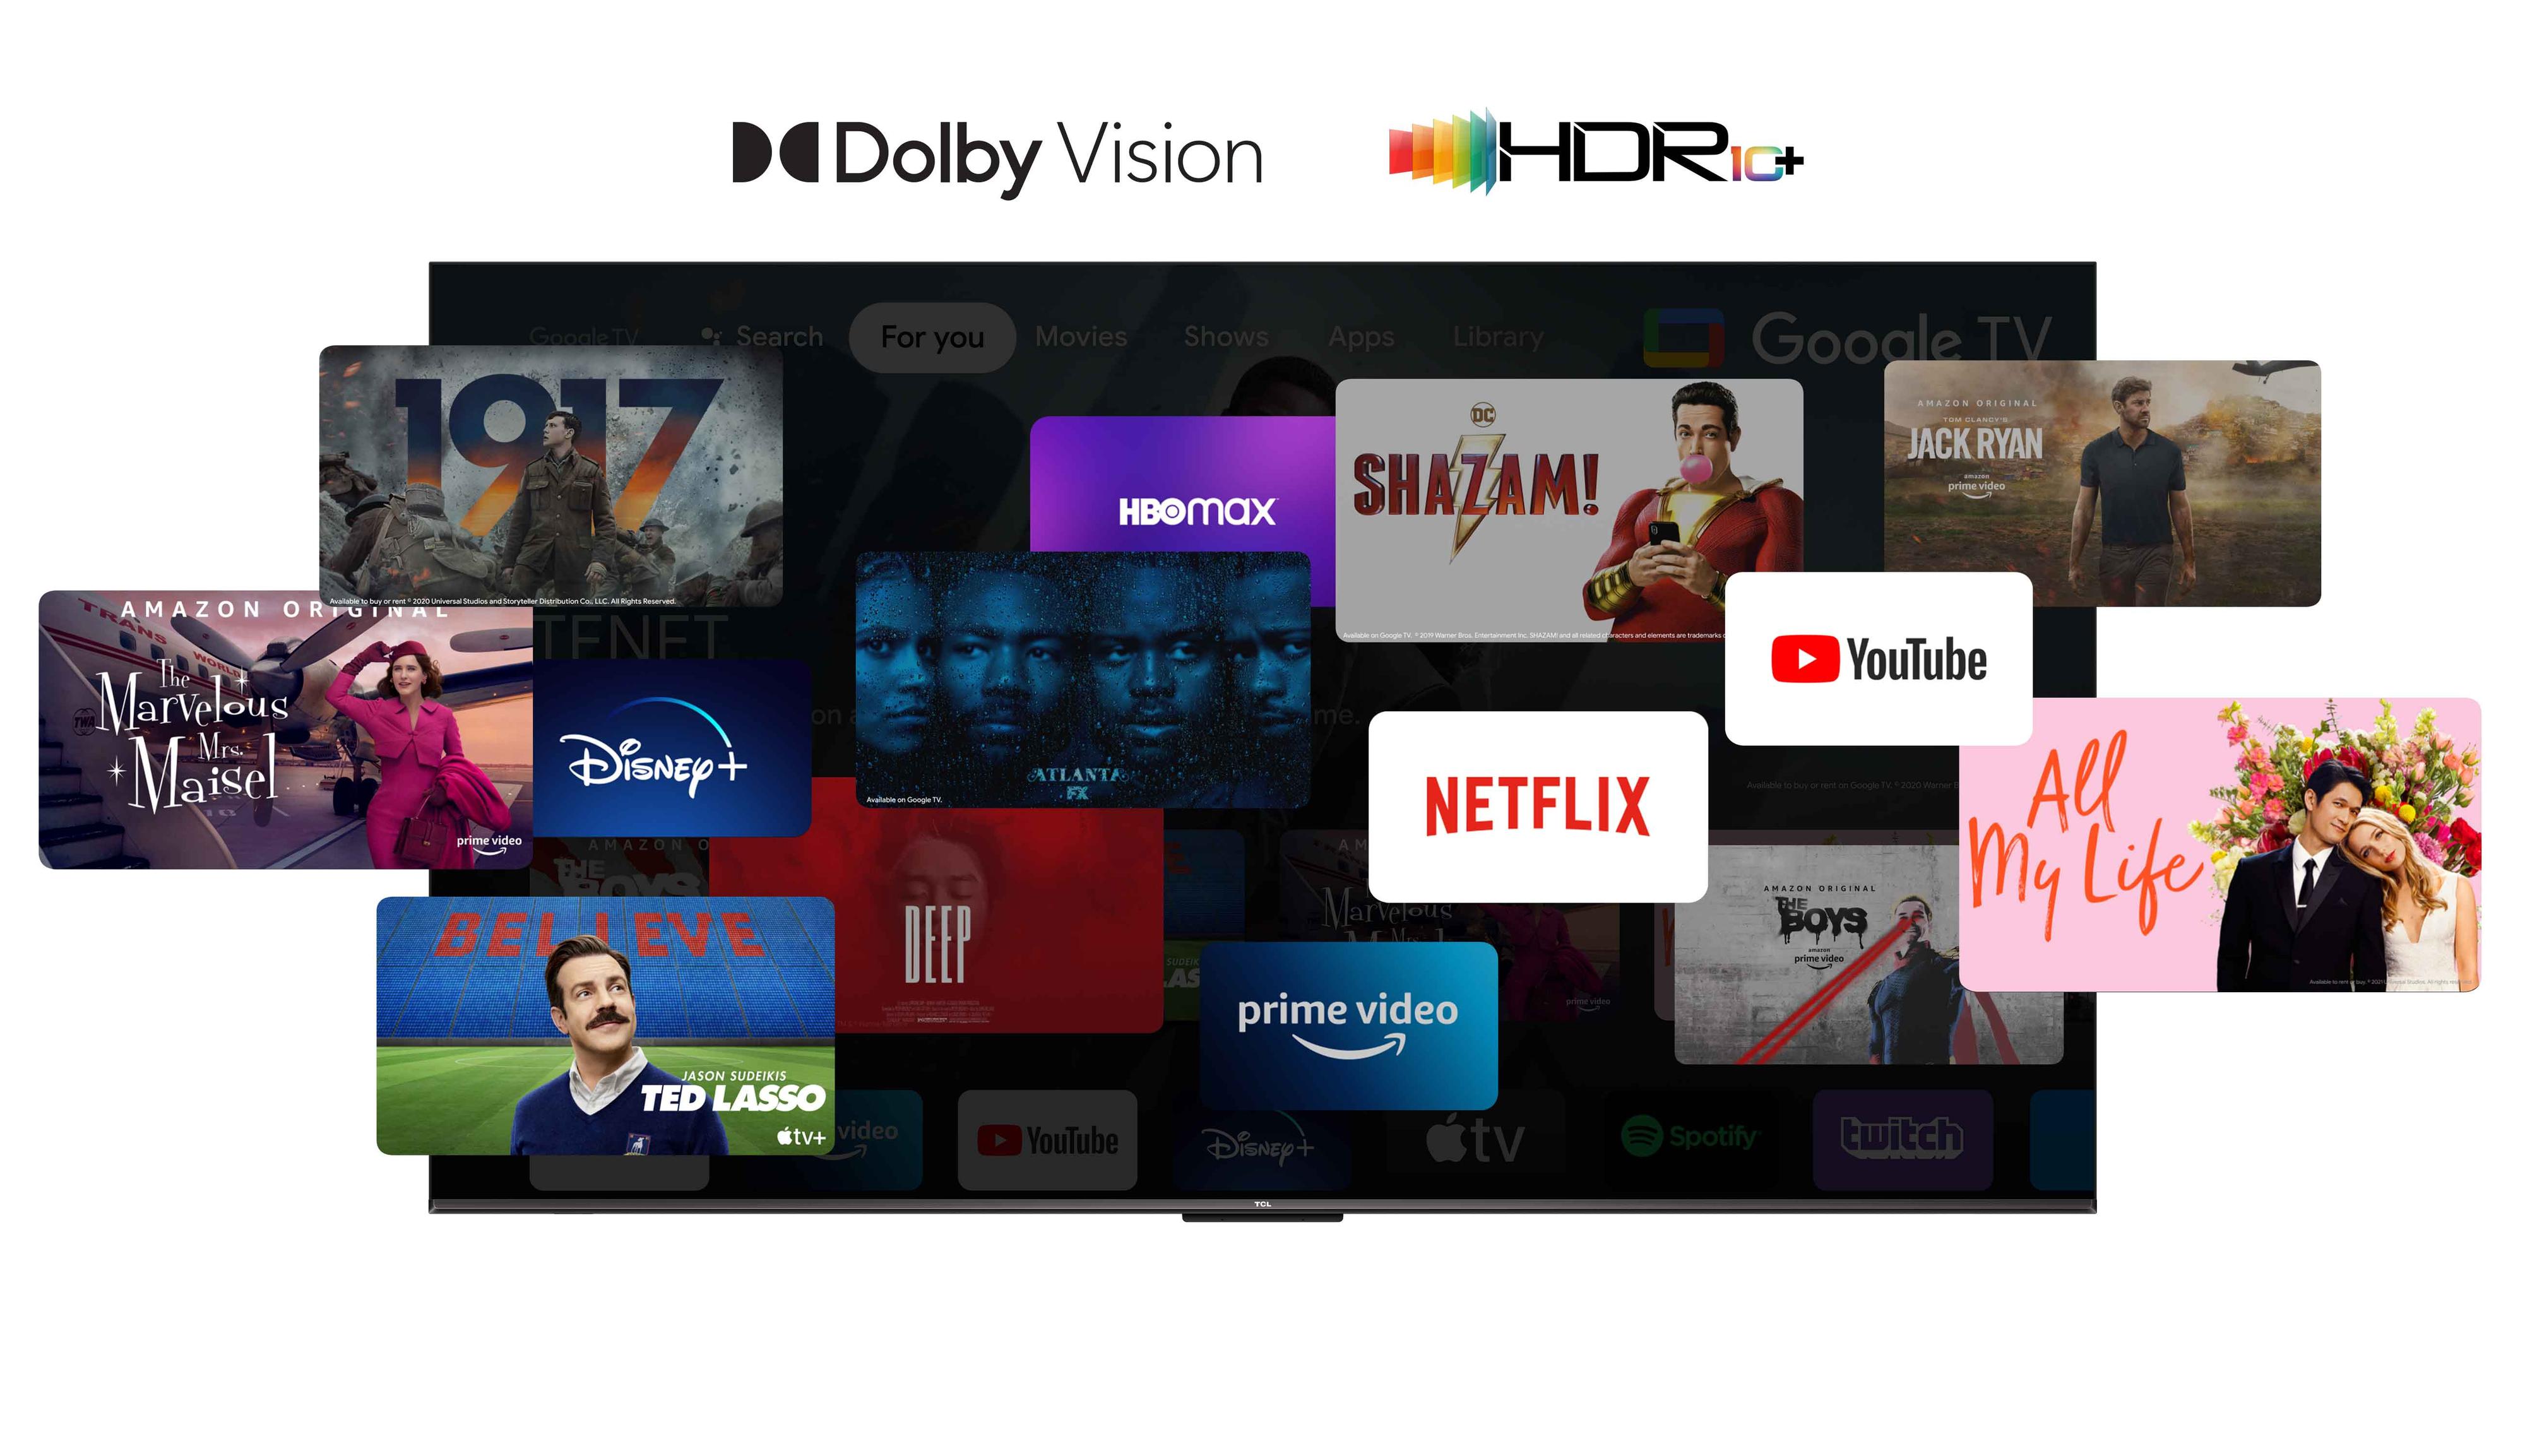 CE - TCL MQLED80 - Dolby VIsion - HDR 10+